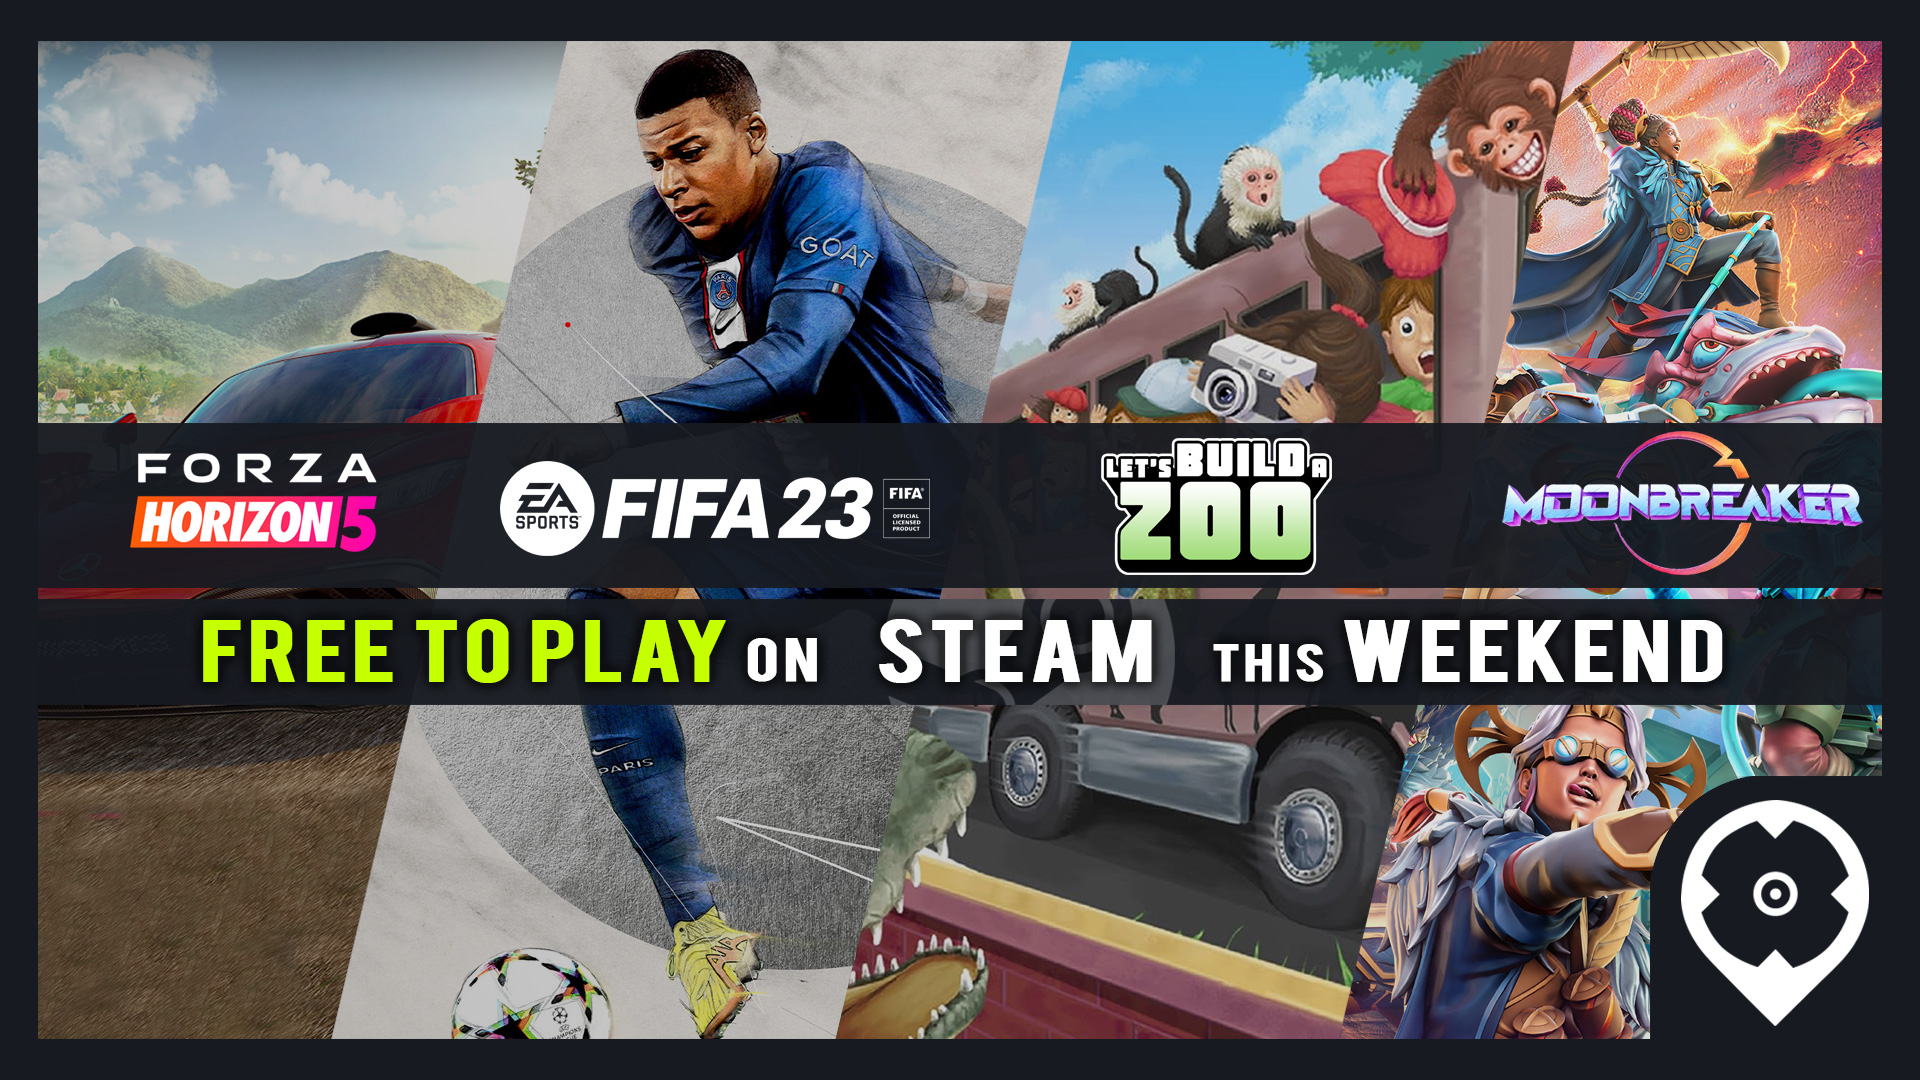 𝗭𝗲𝗻𝗴𝗮𝗺𝗲𝗕𝗗 - Limited Time Offer FIFA 23 (Steam Turkey